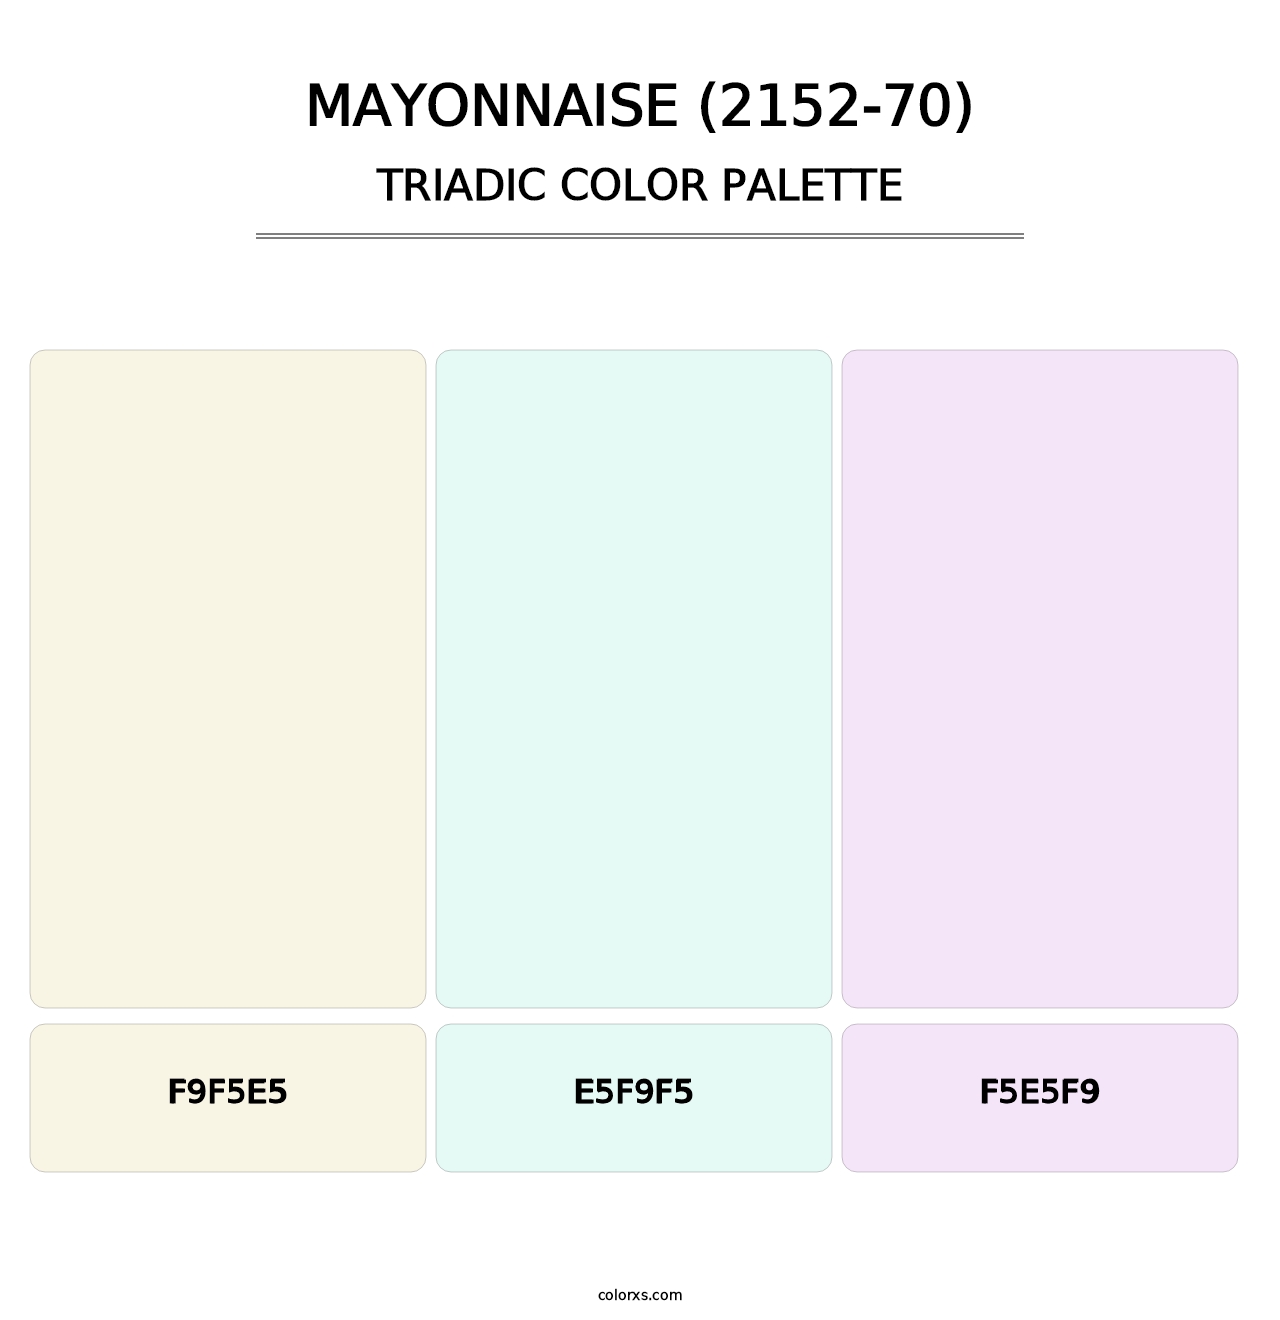 Mayonnaise (2152-70) - Triadic Color Palette